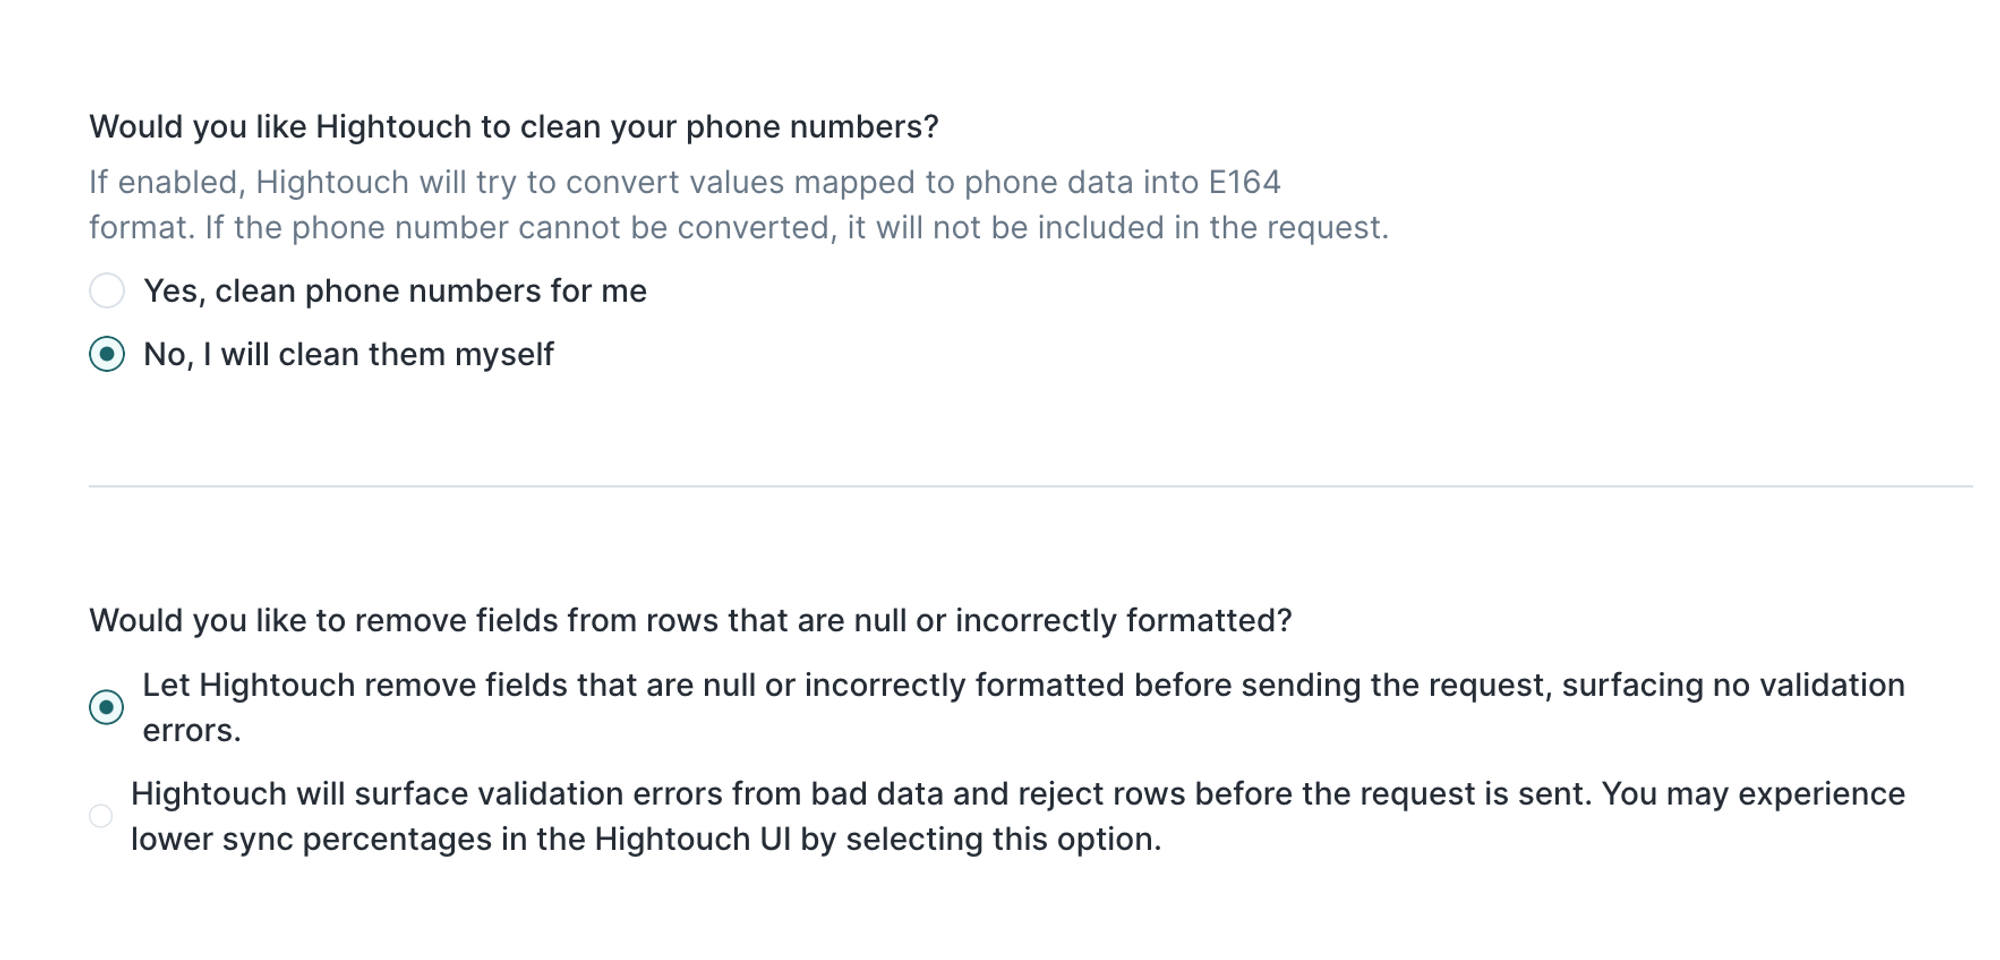 Clean phone numbers and remove null or incorrectly formatted fields